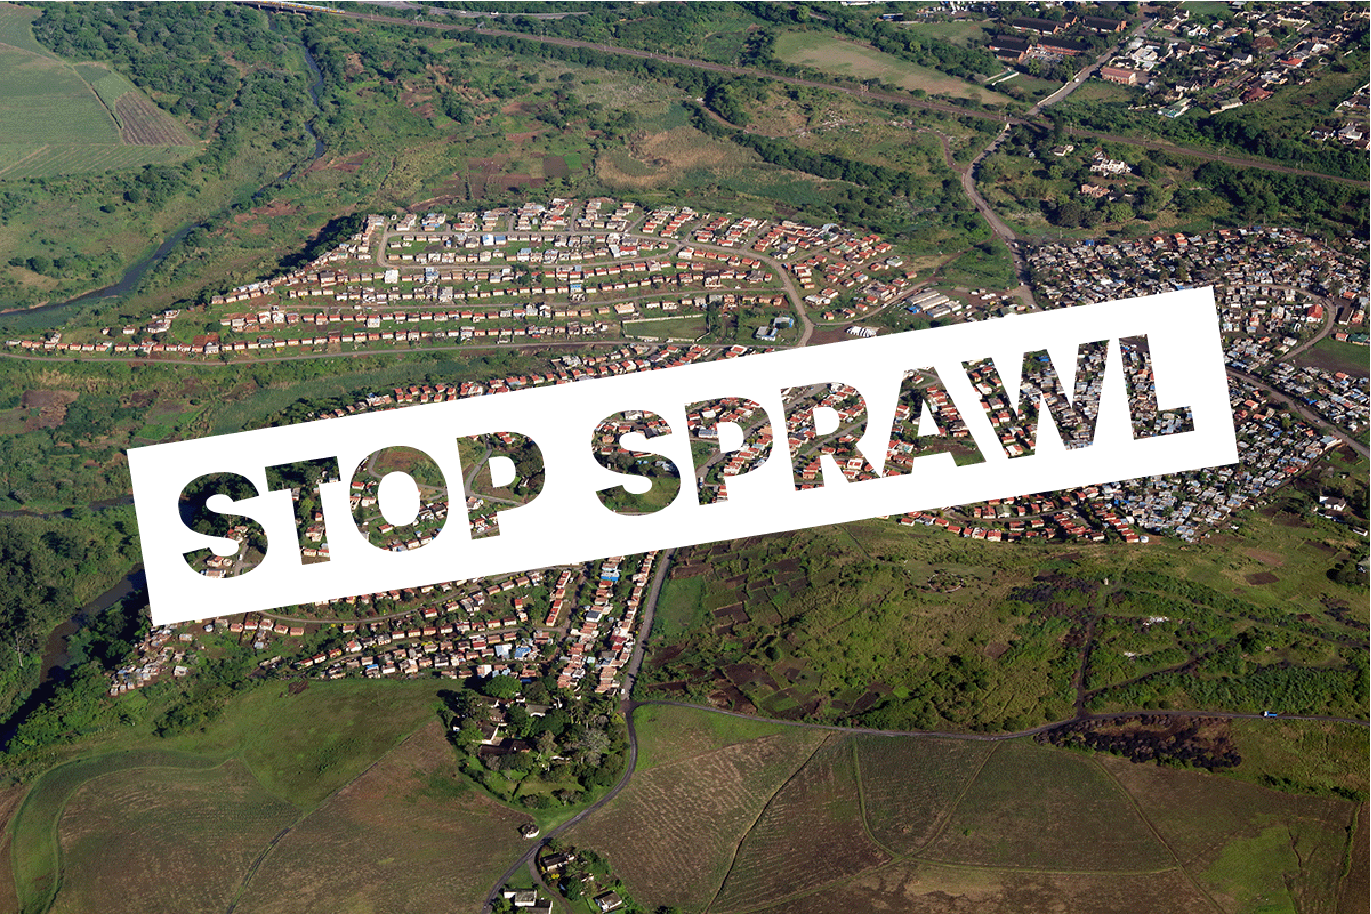 ACTION ALERT: Protect Our Forests and Farms from Sprawl